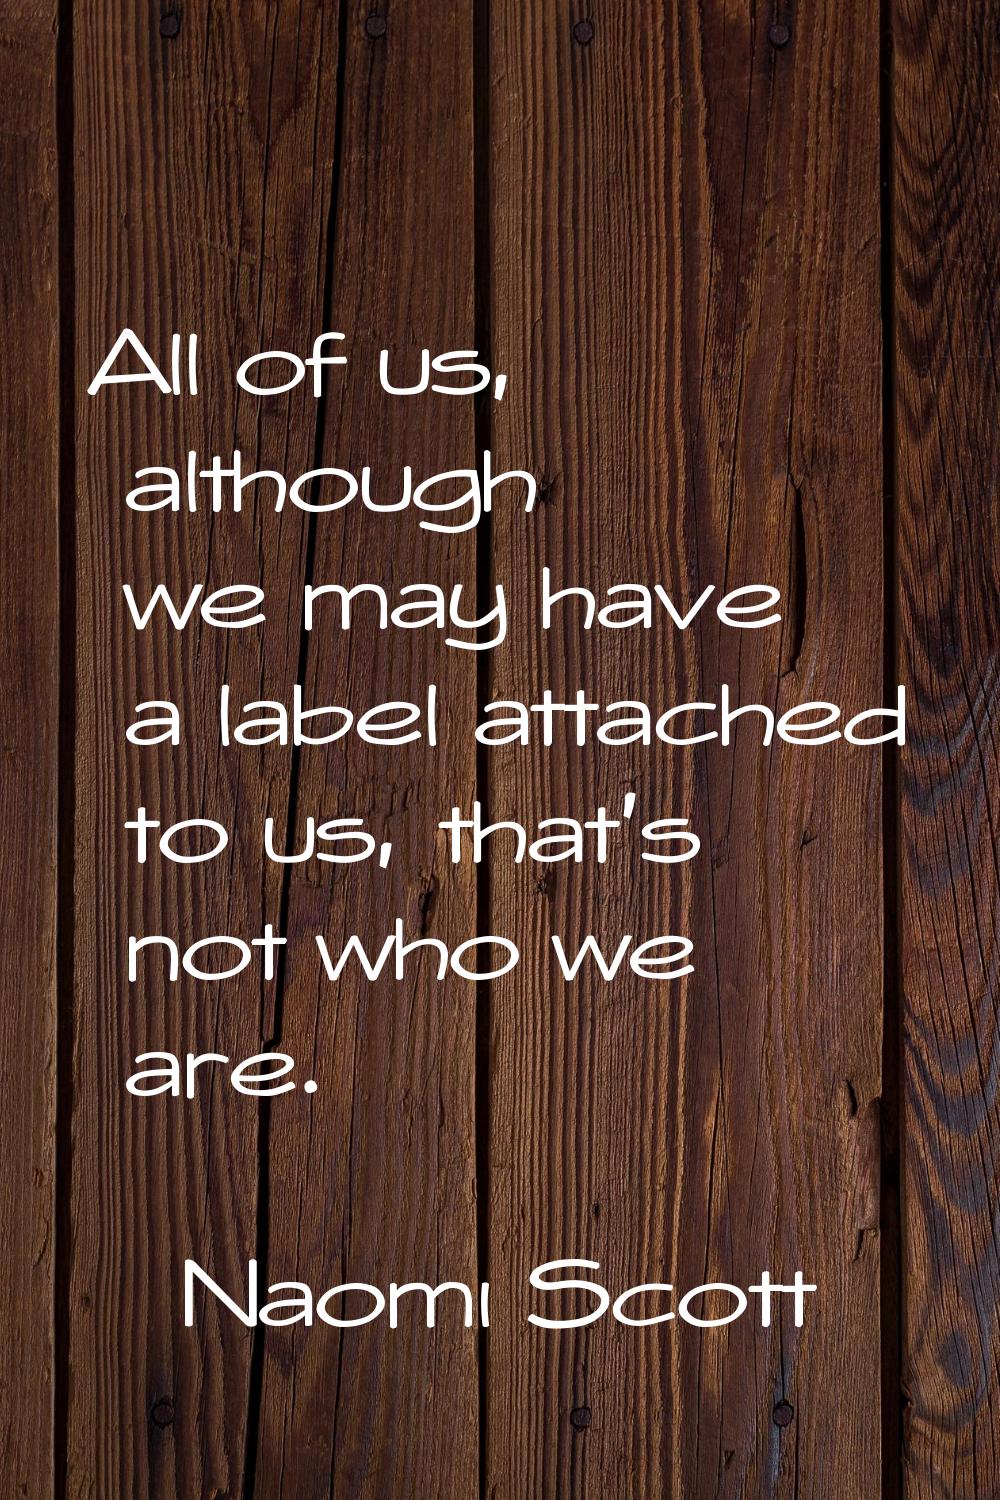 All of us, although we may have a label attached to us, that's not who we are.